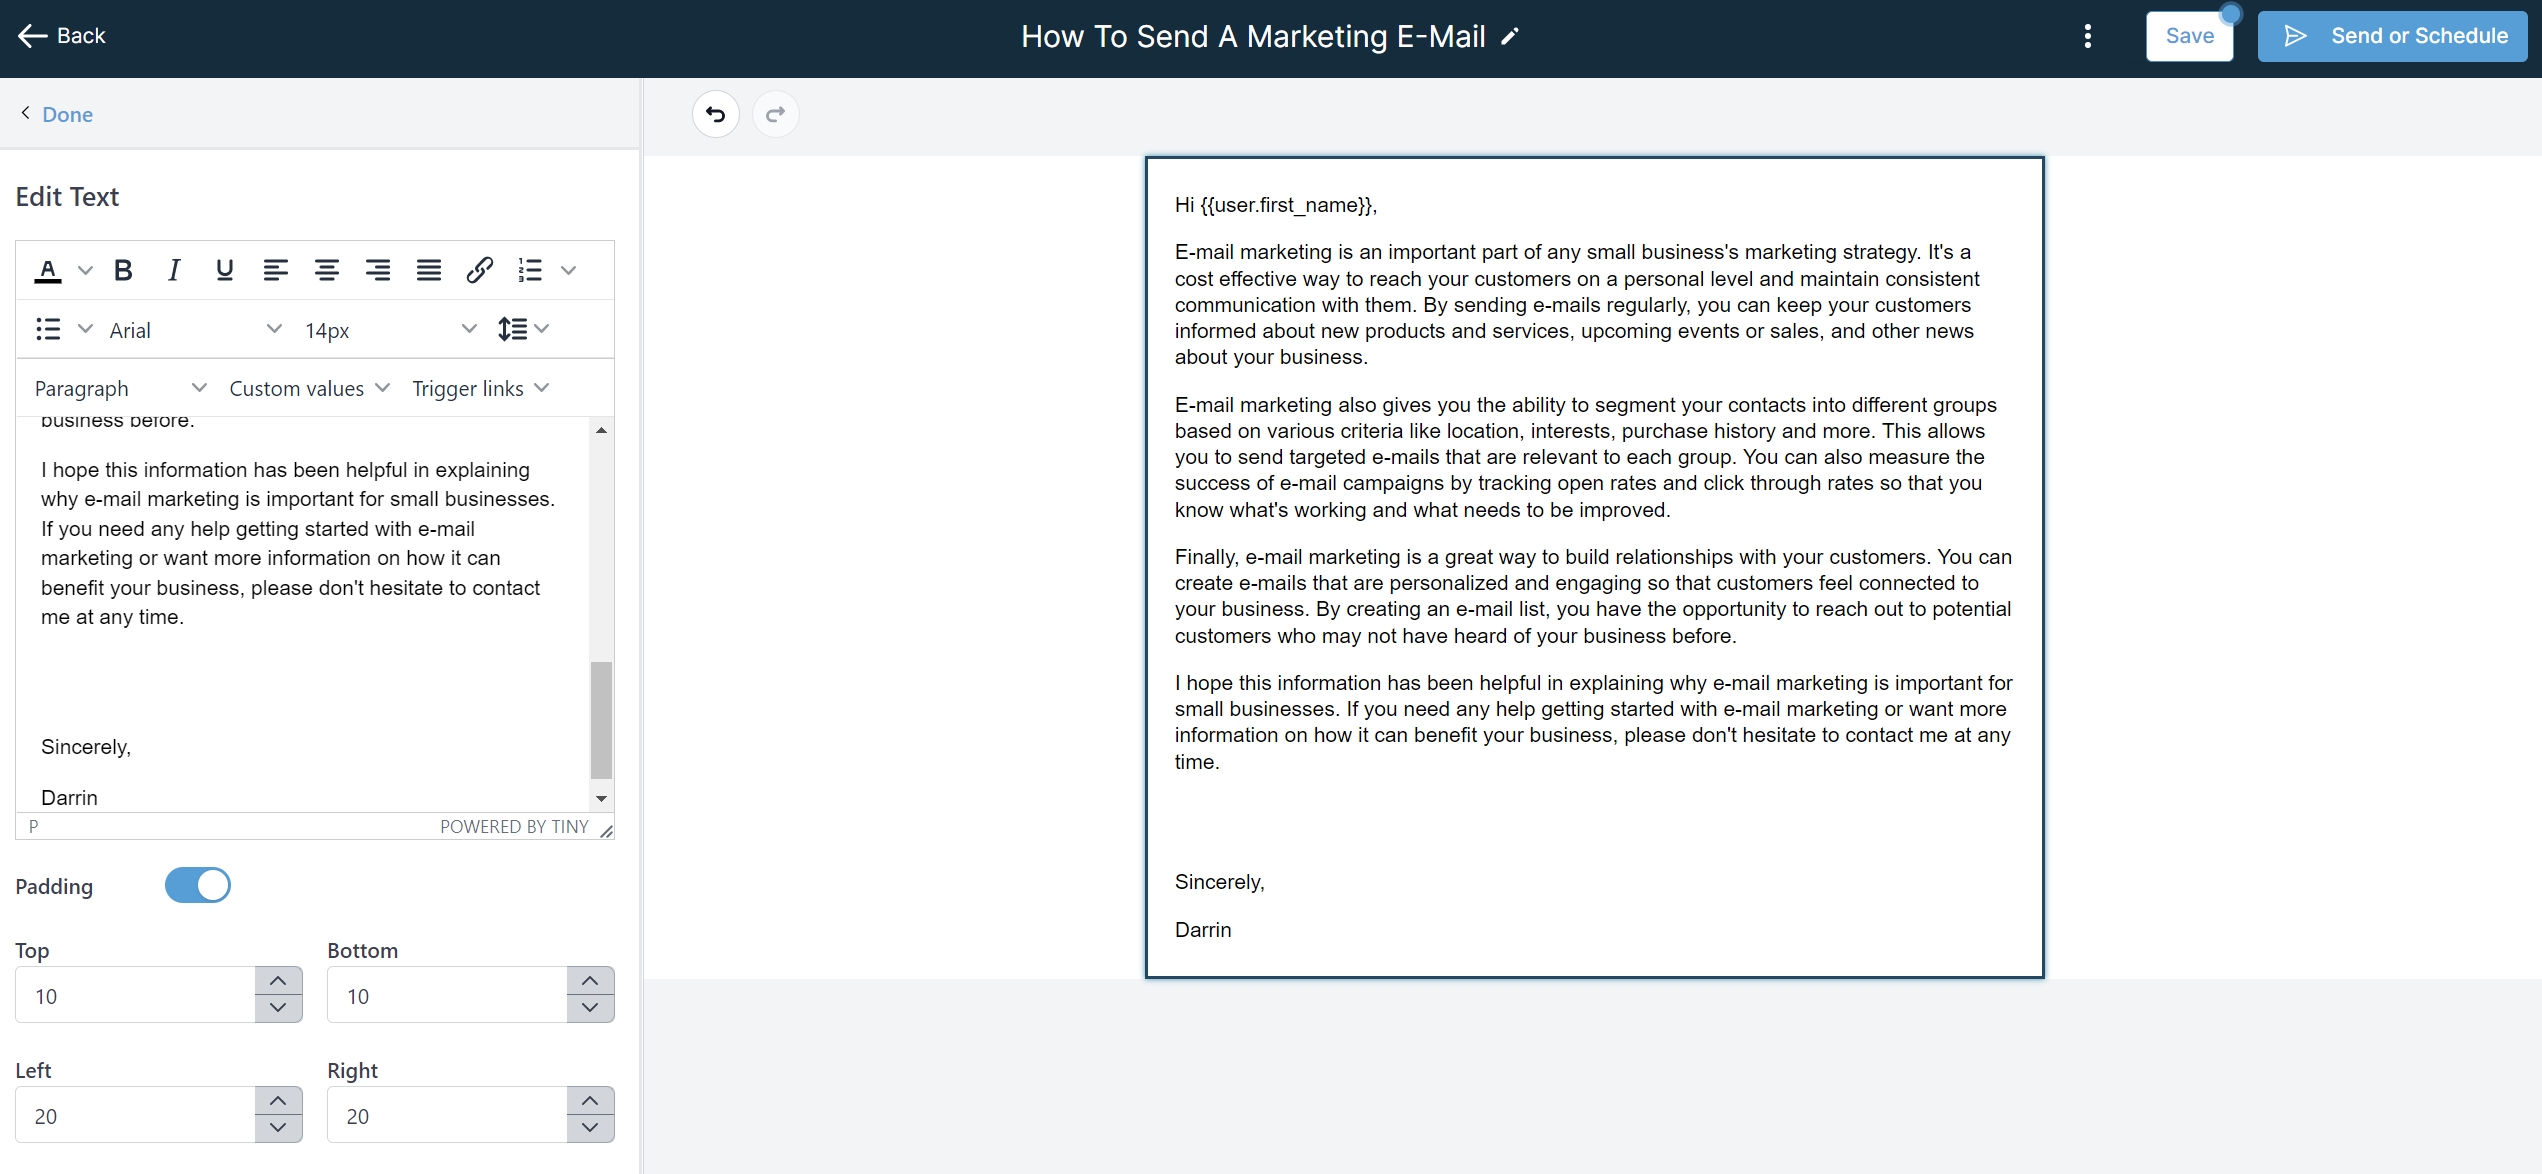 3 Things to Consider When Sending a Marketing E-Mail